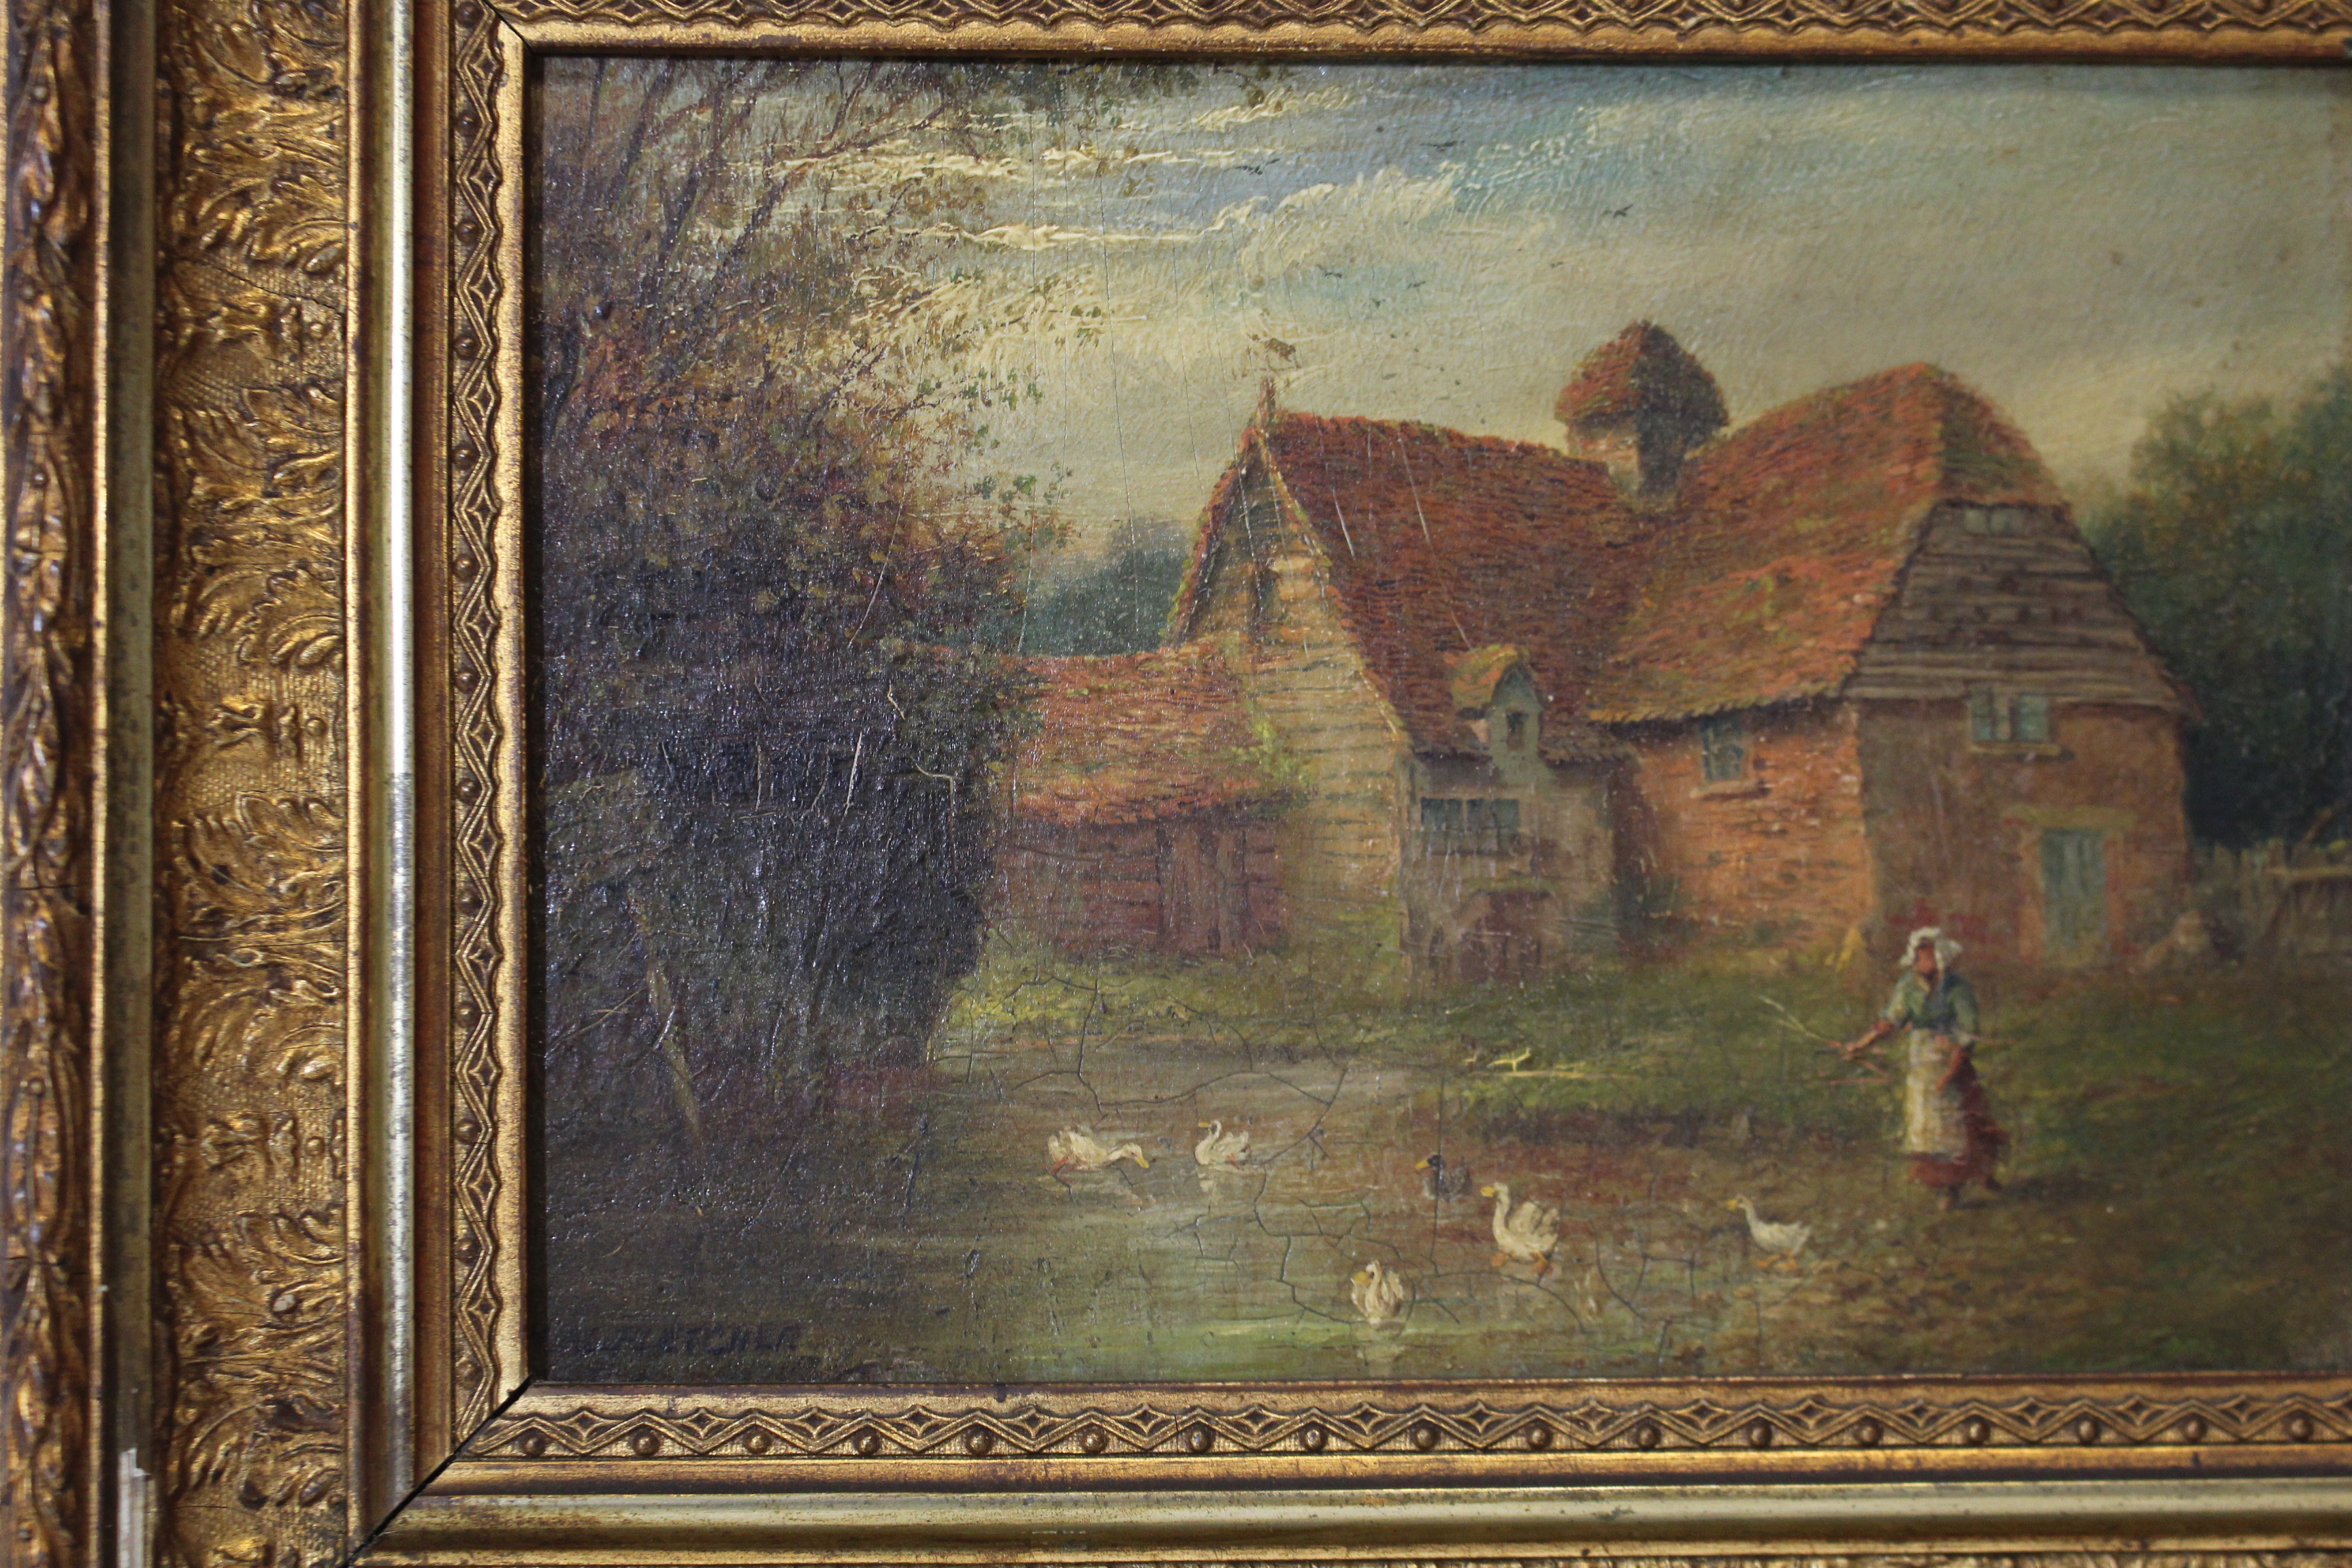 H. M. FLETCHER (British, 19th century). “An Old Farmhouse near Tetterige, Herts”. Signed lower - Image 2 of 3